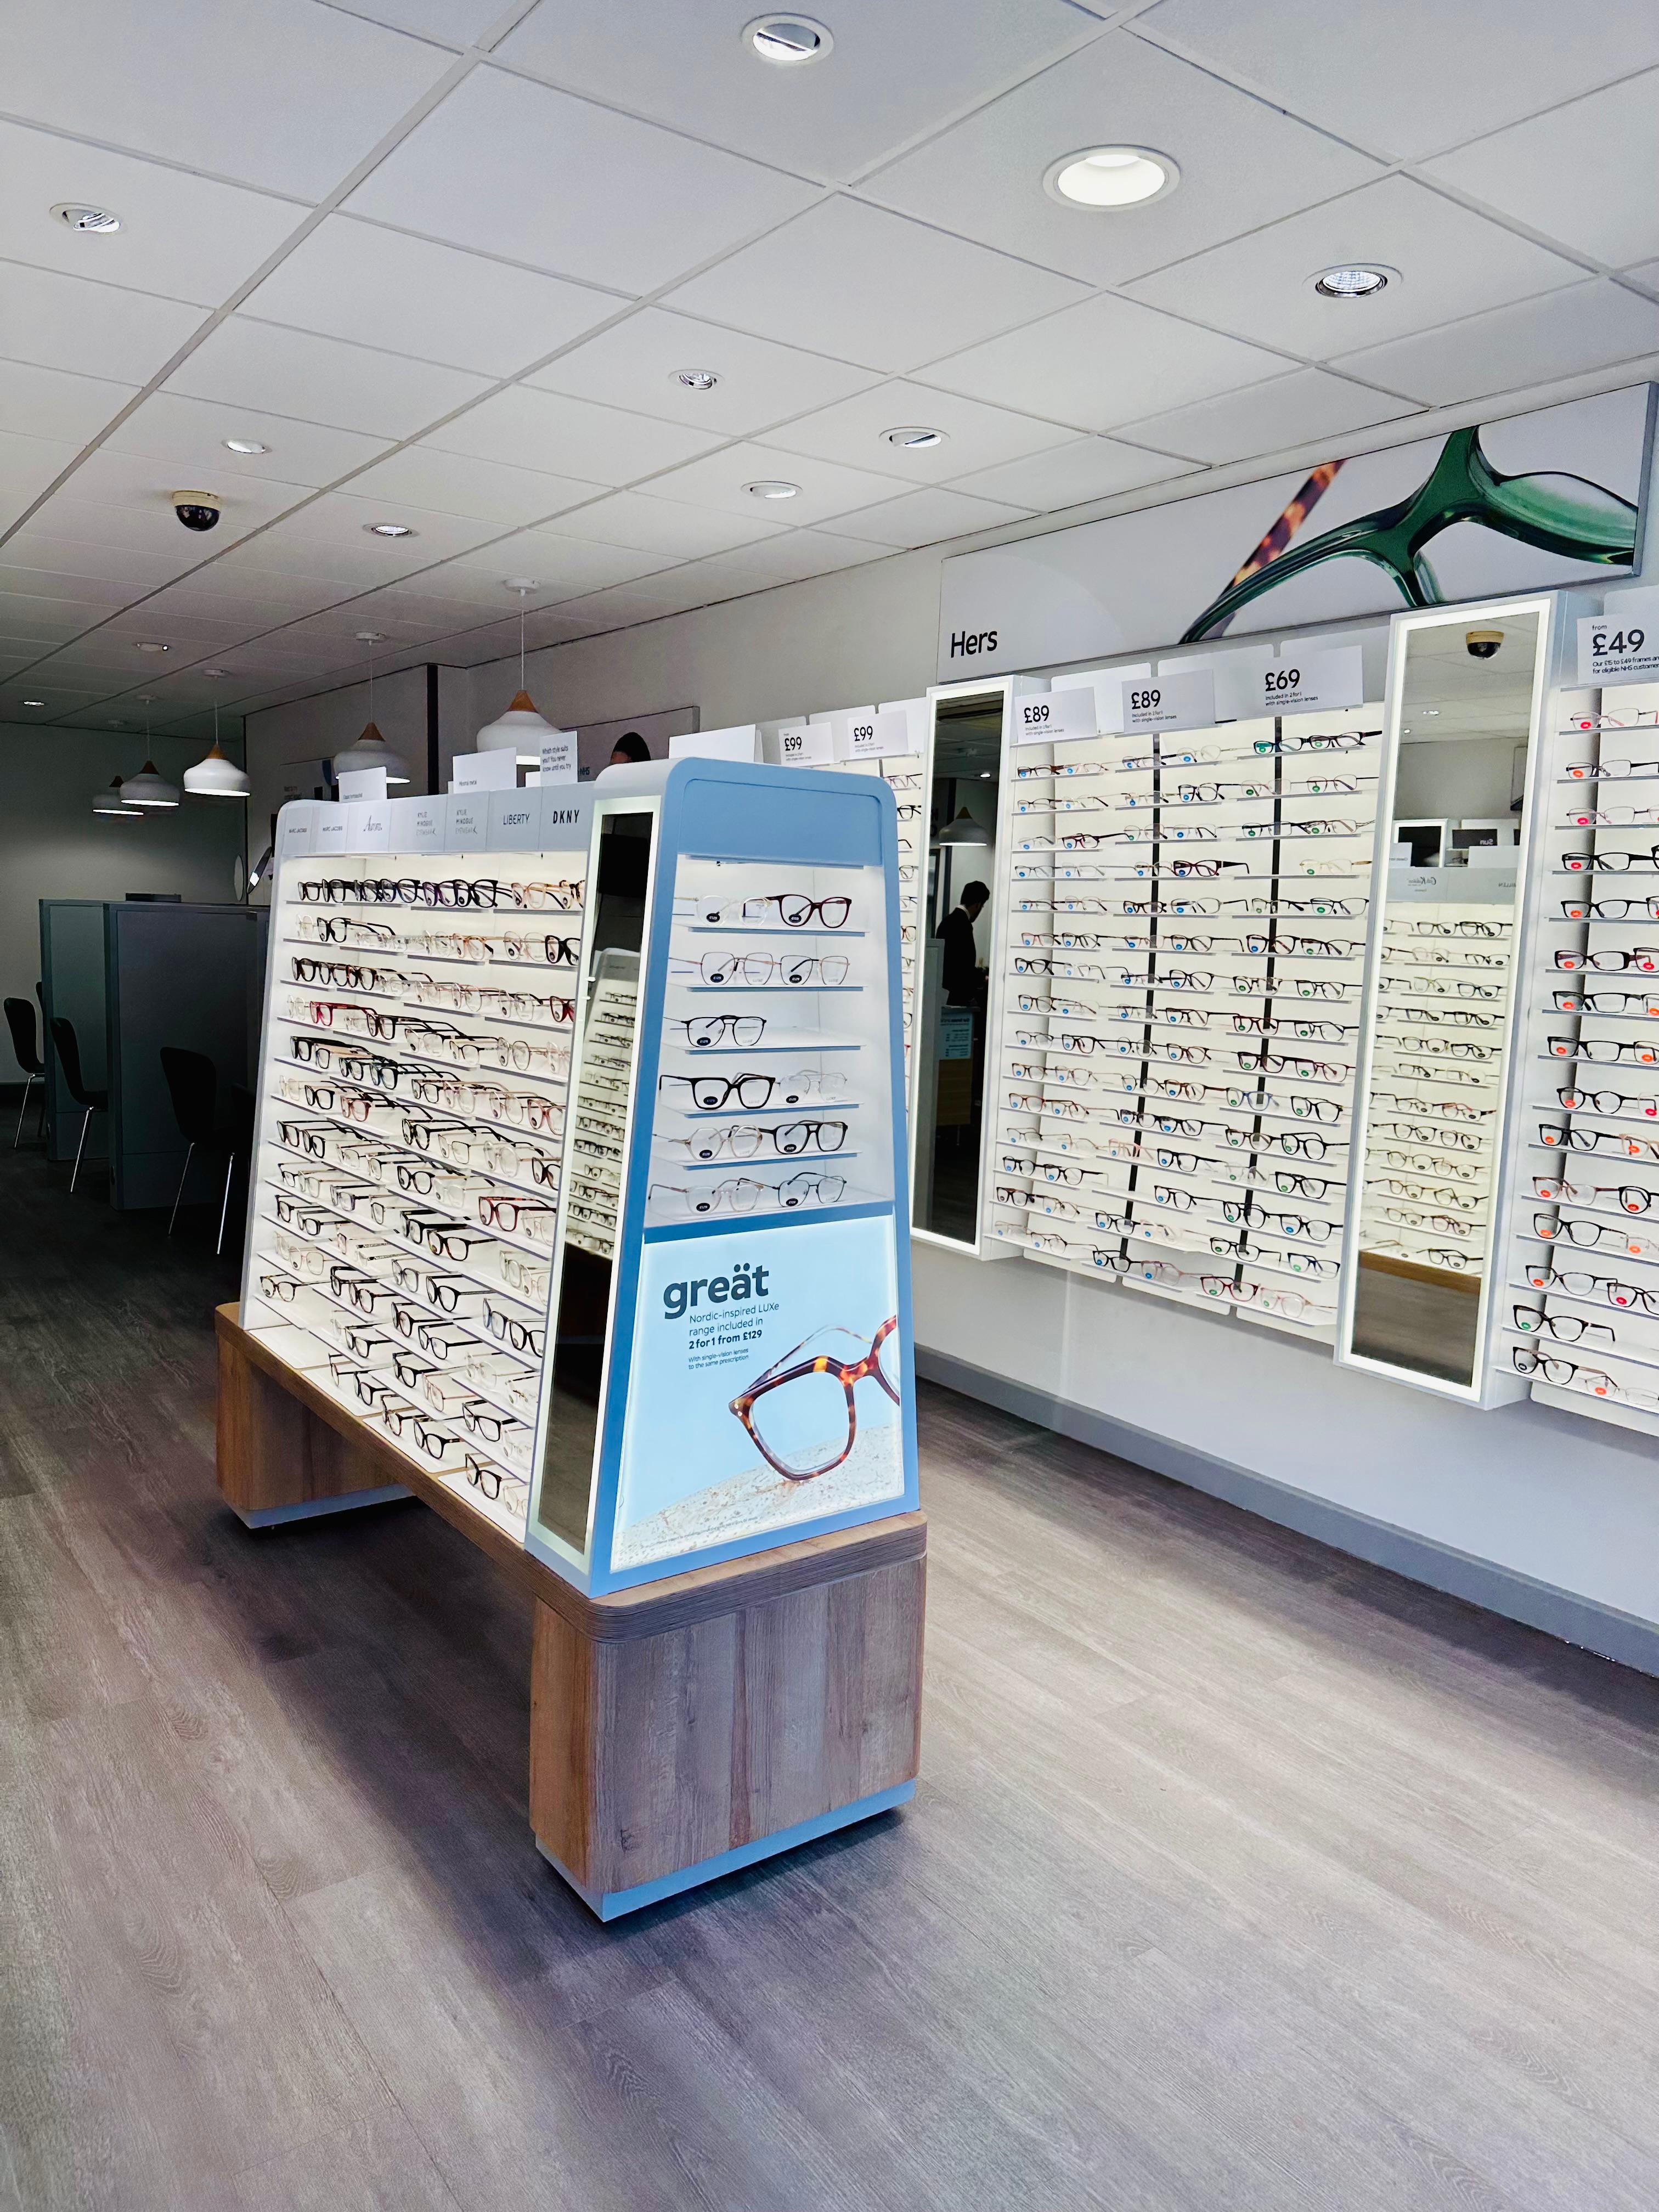 Images Specsavers Opticians and Audiologists - Croydon North End